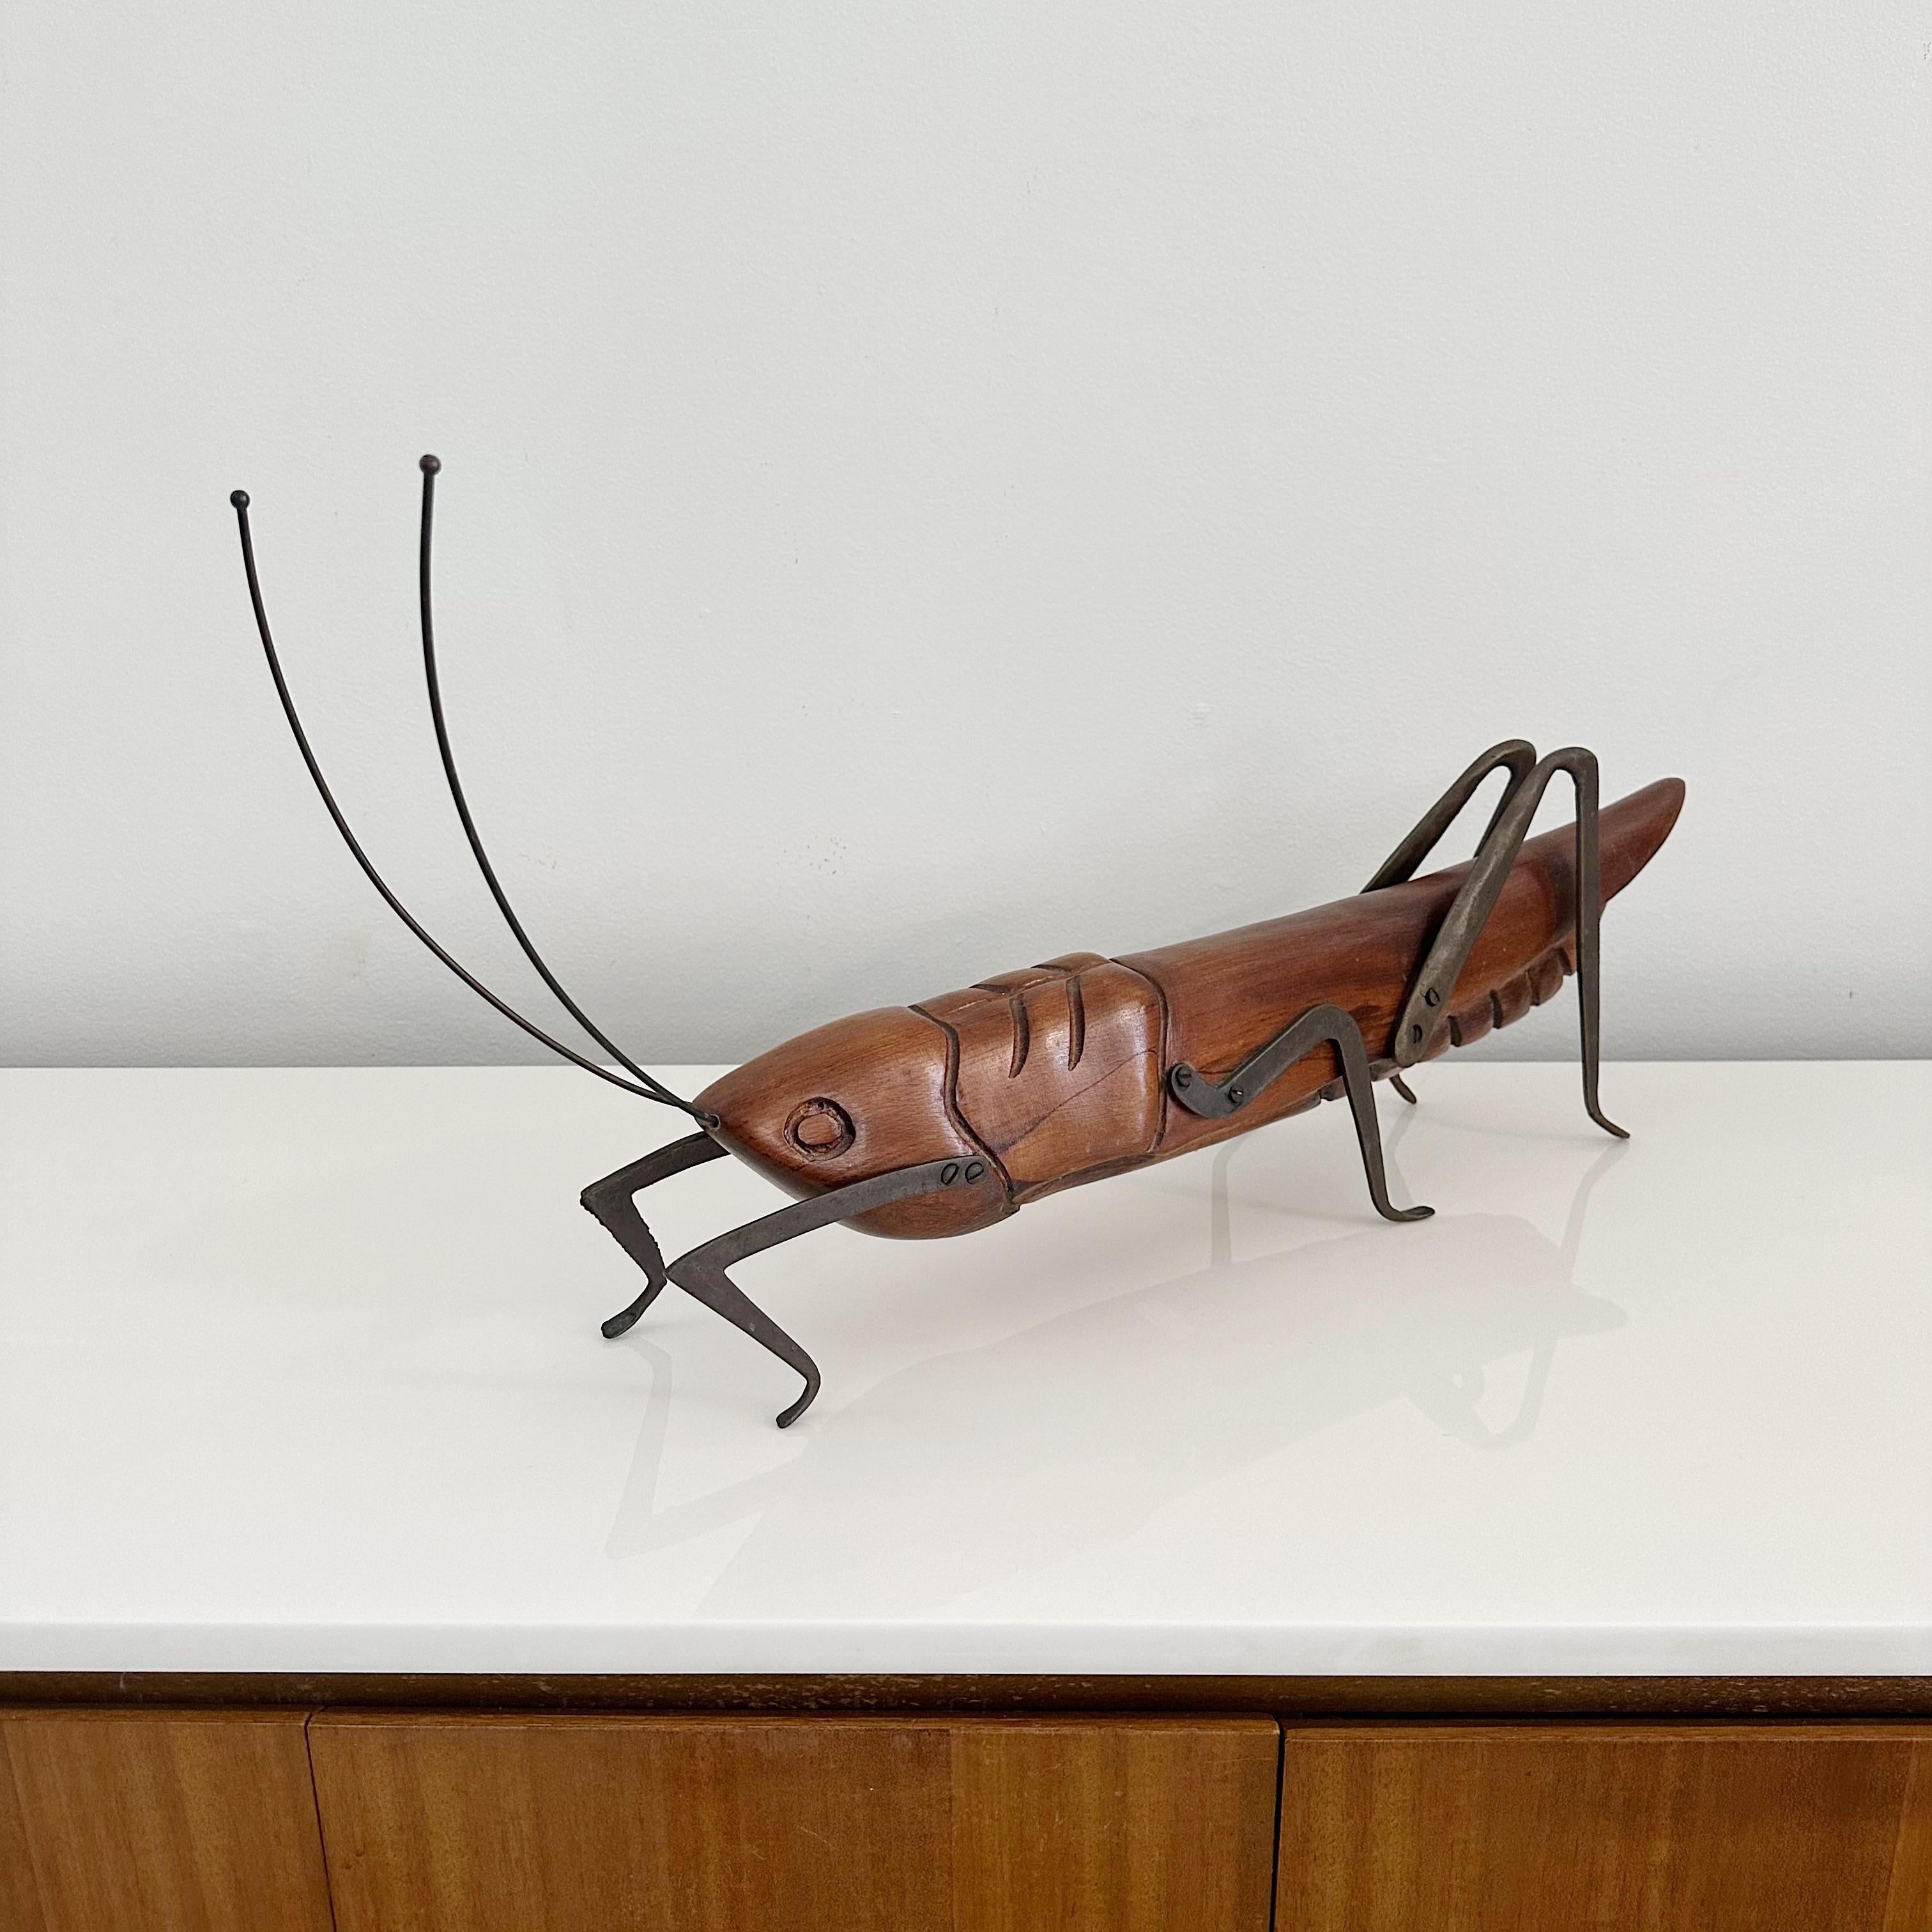 Hand Carved grasshopper sculpture by Sarreid Ltd of Spain, circa 1970s, Made in Italy.
Body of hand carved solid wood with accents in patinated brass